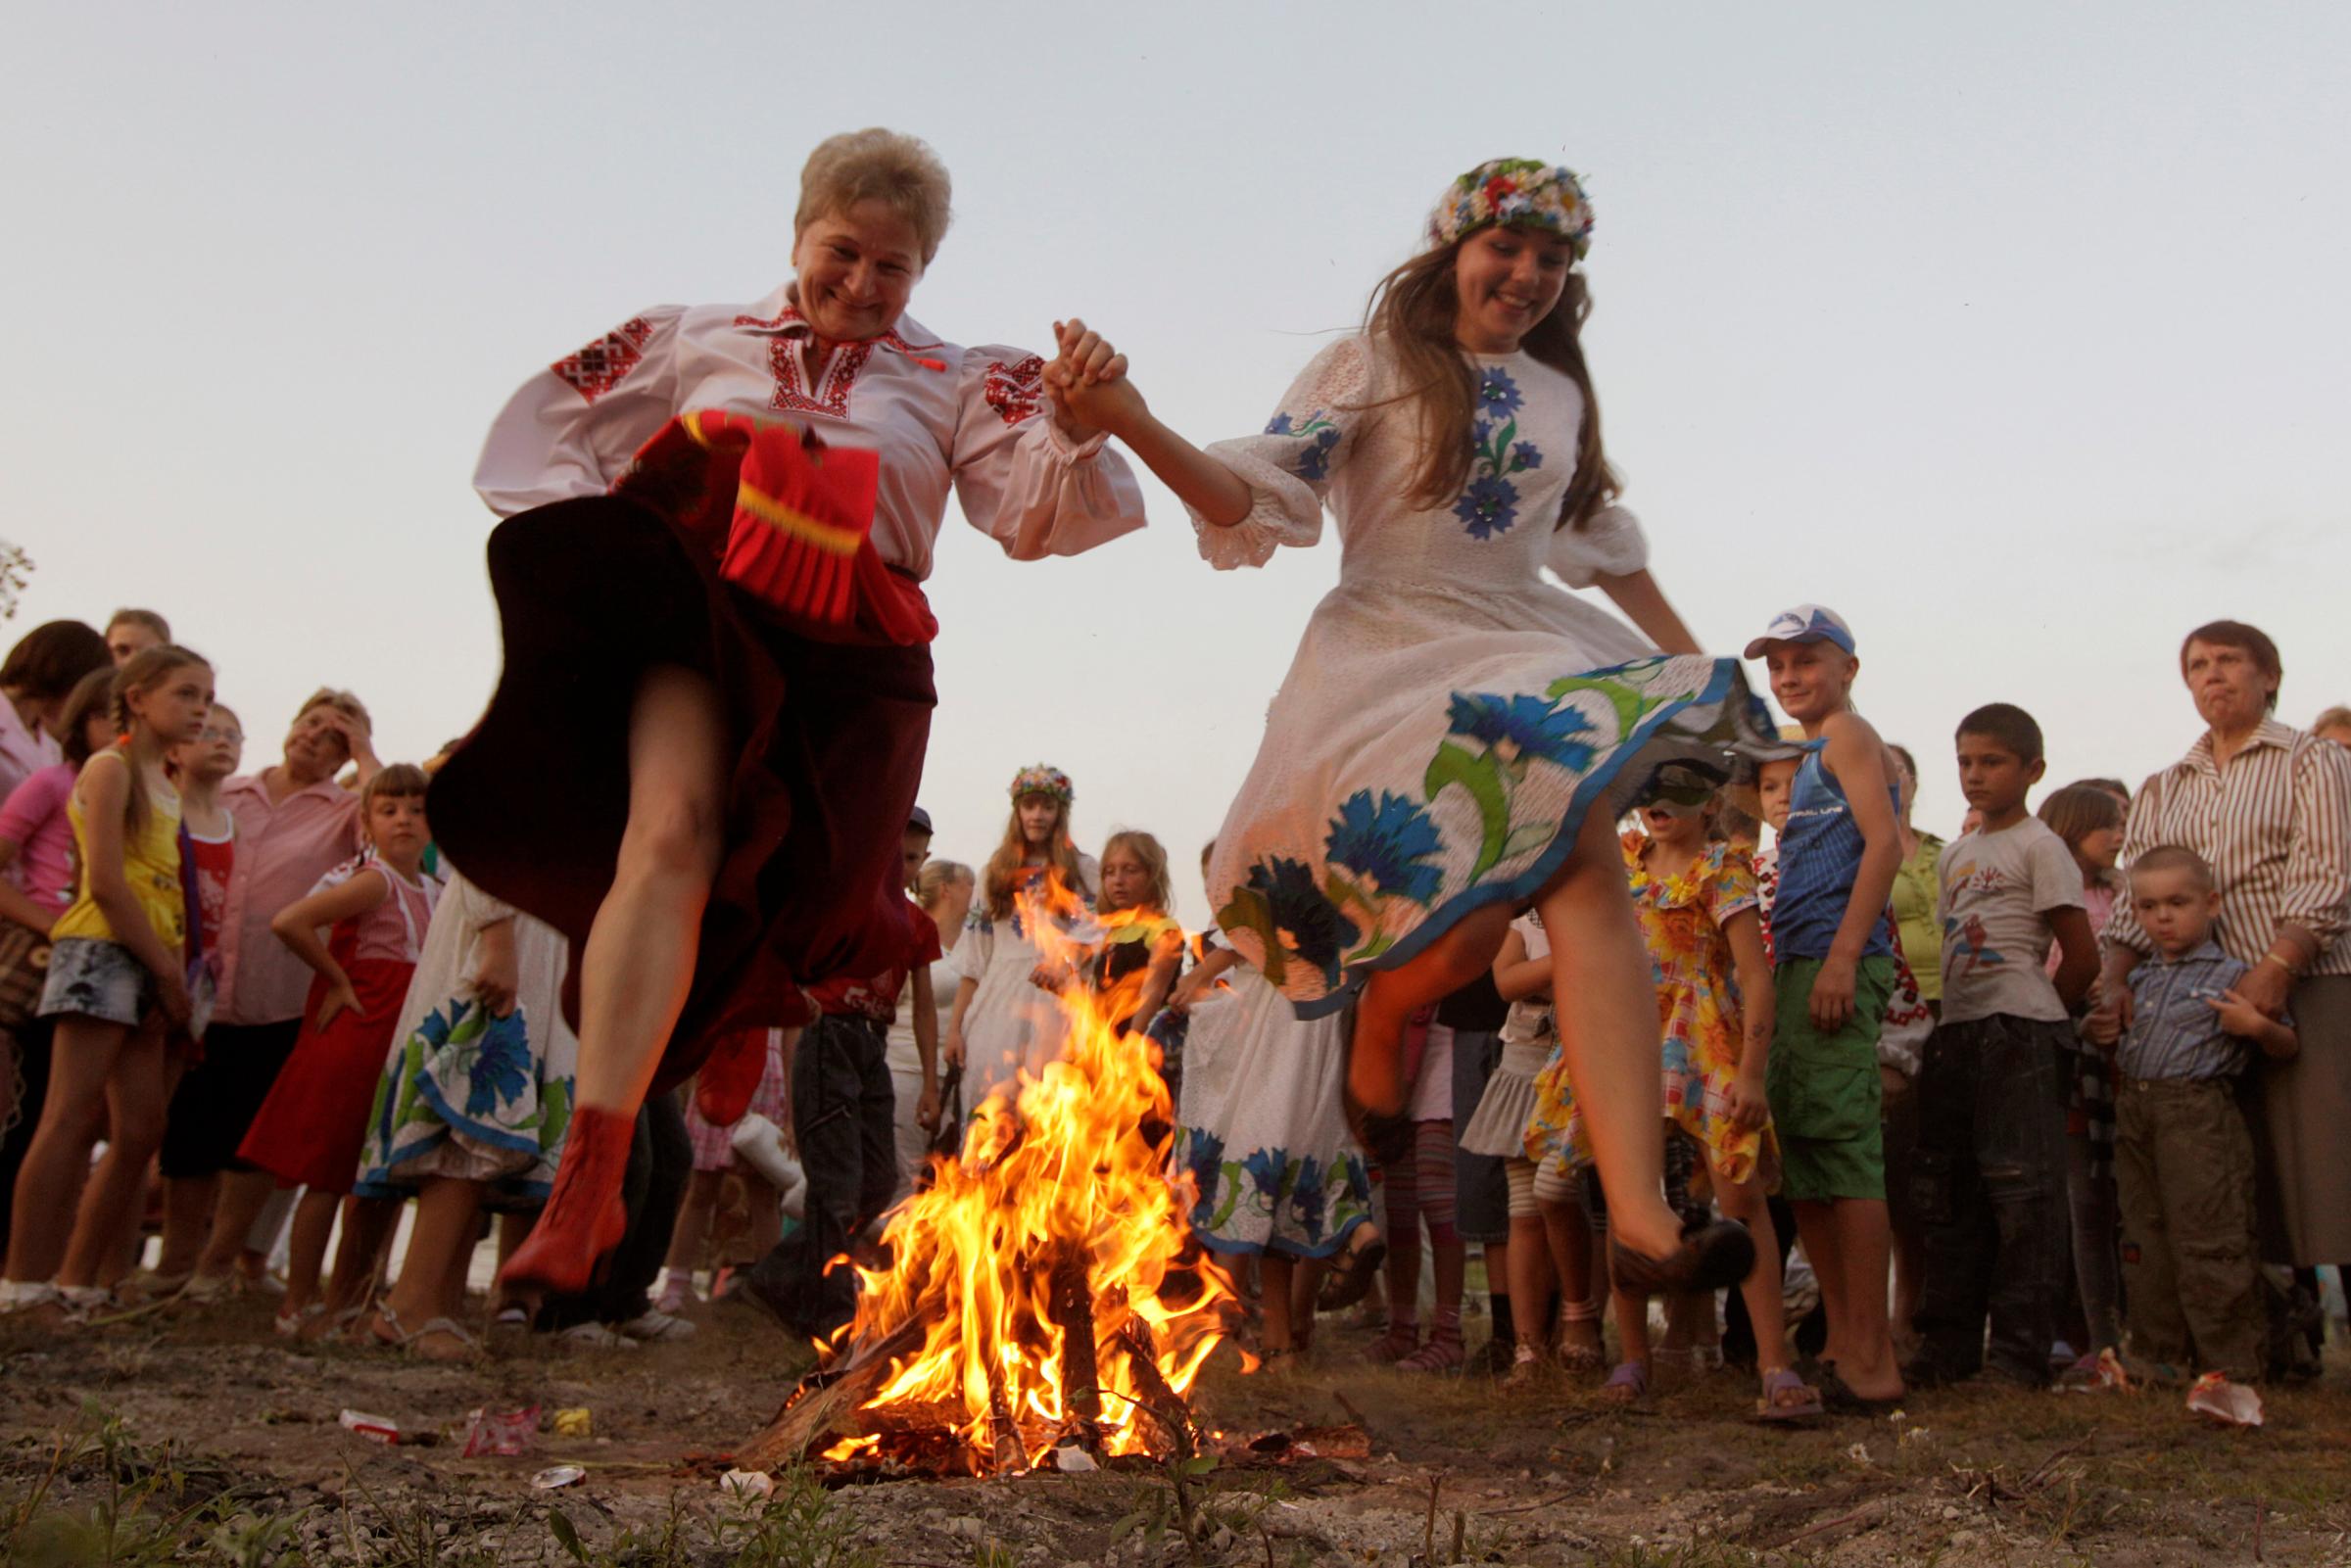 Women jump over a campfire during the Ivan Kupala festival in the town of Turov